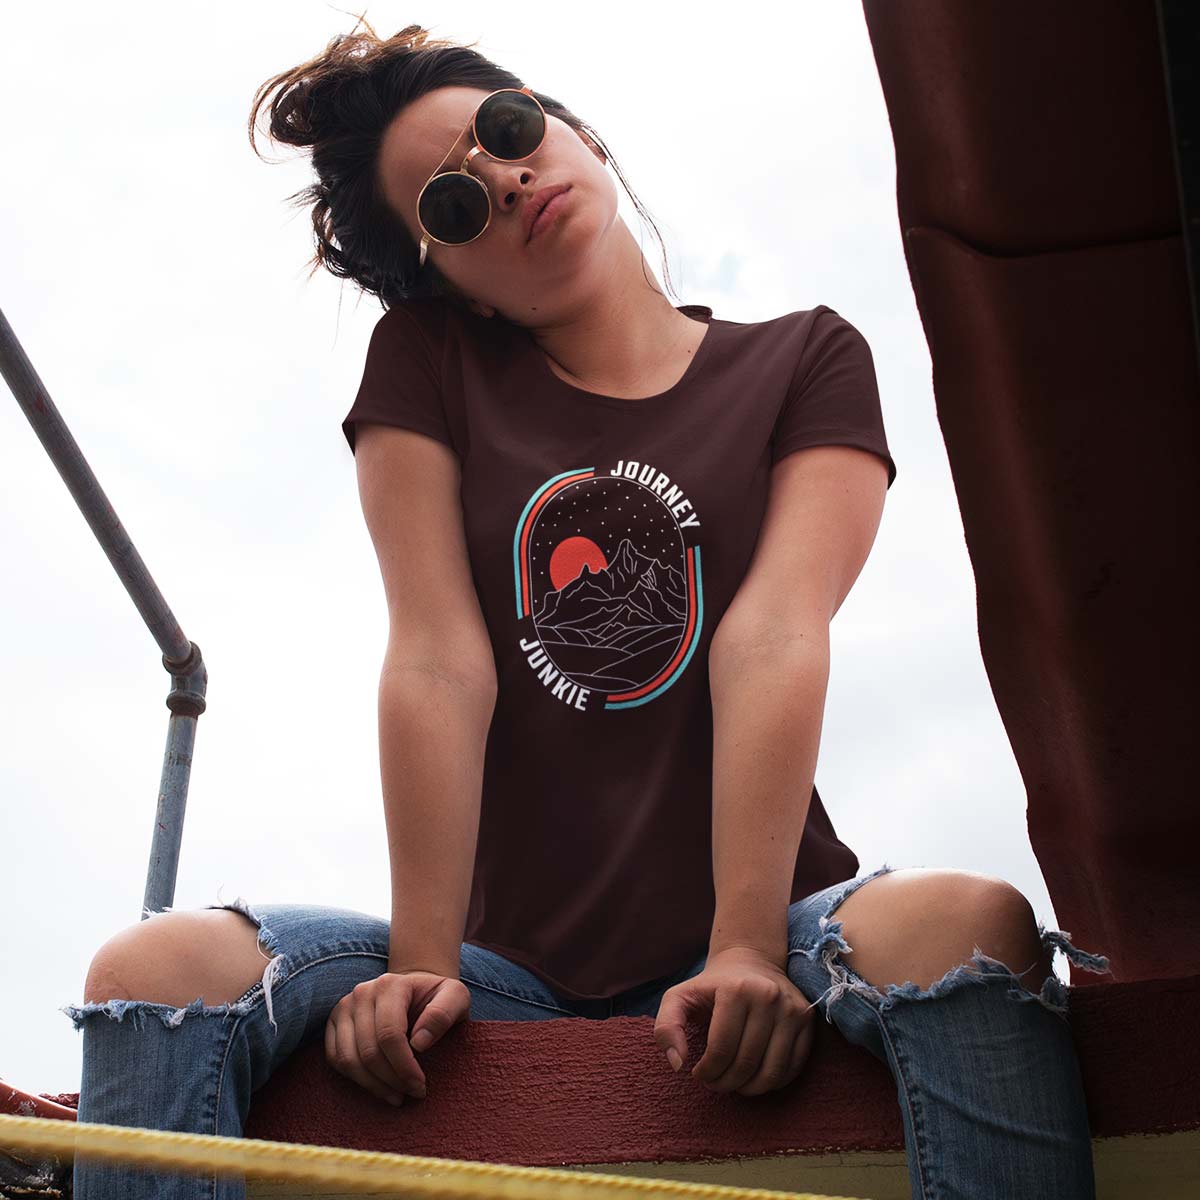 Journey-junkie-printed-t-shirt-for-women by Ghumakkad